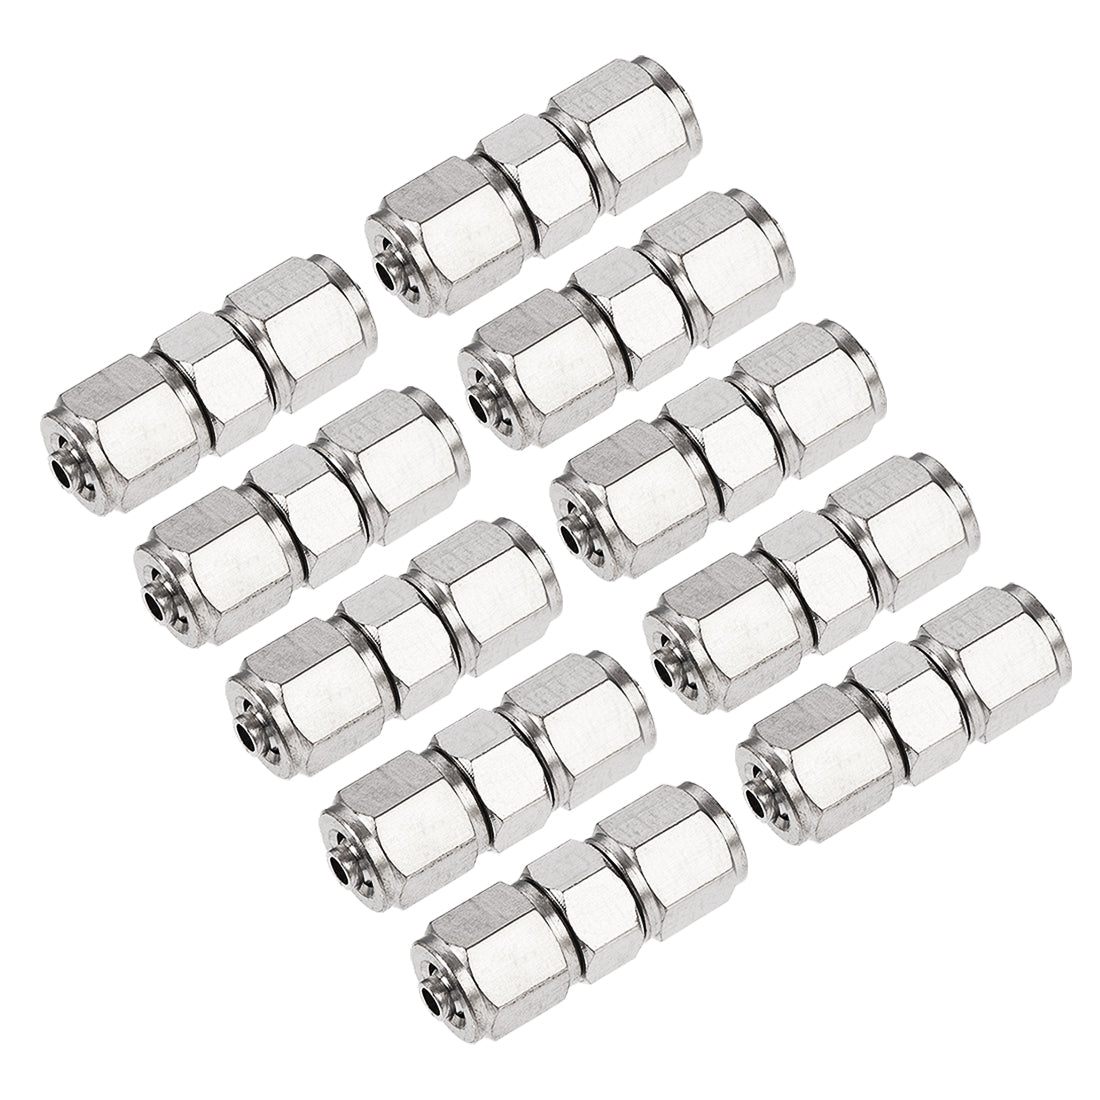 uxcell Uxcell Compression Tube Fitting Nickel Plating for 4mm Pneumatic Hose Tube 10pcs